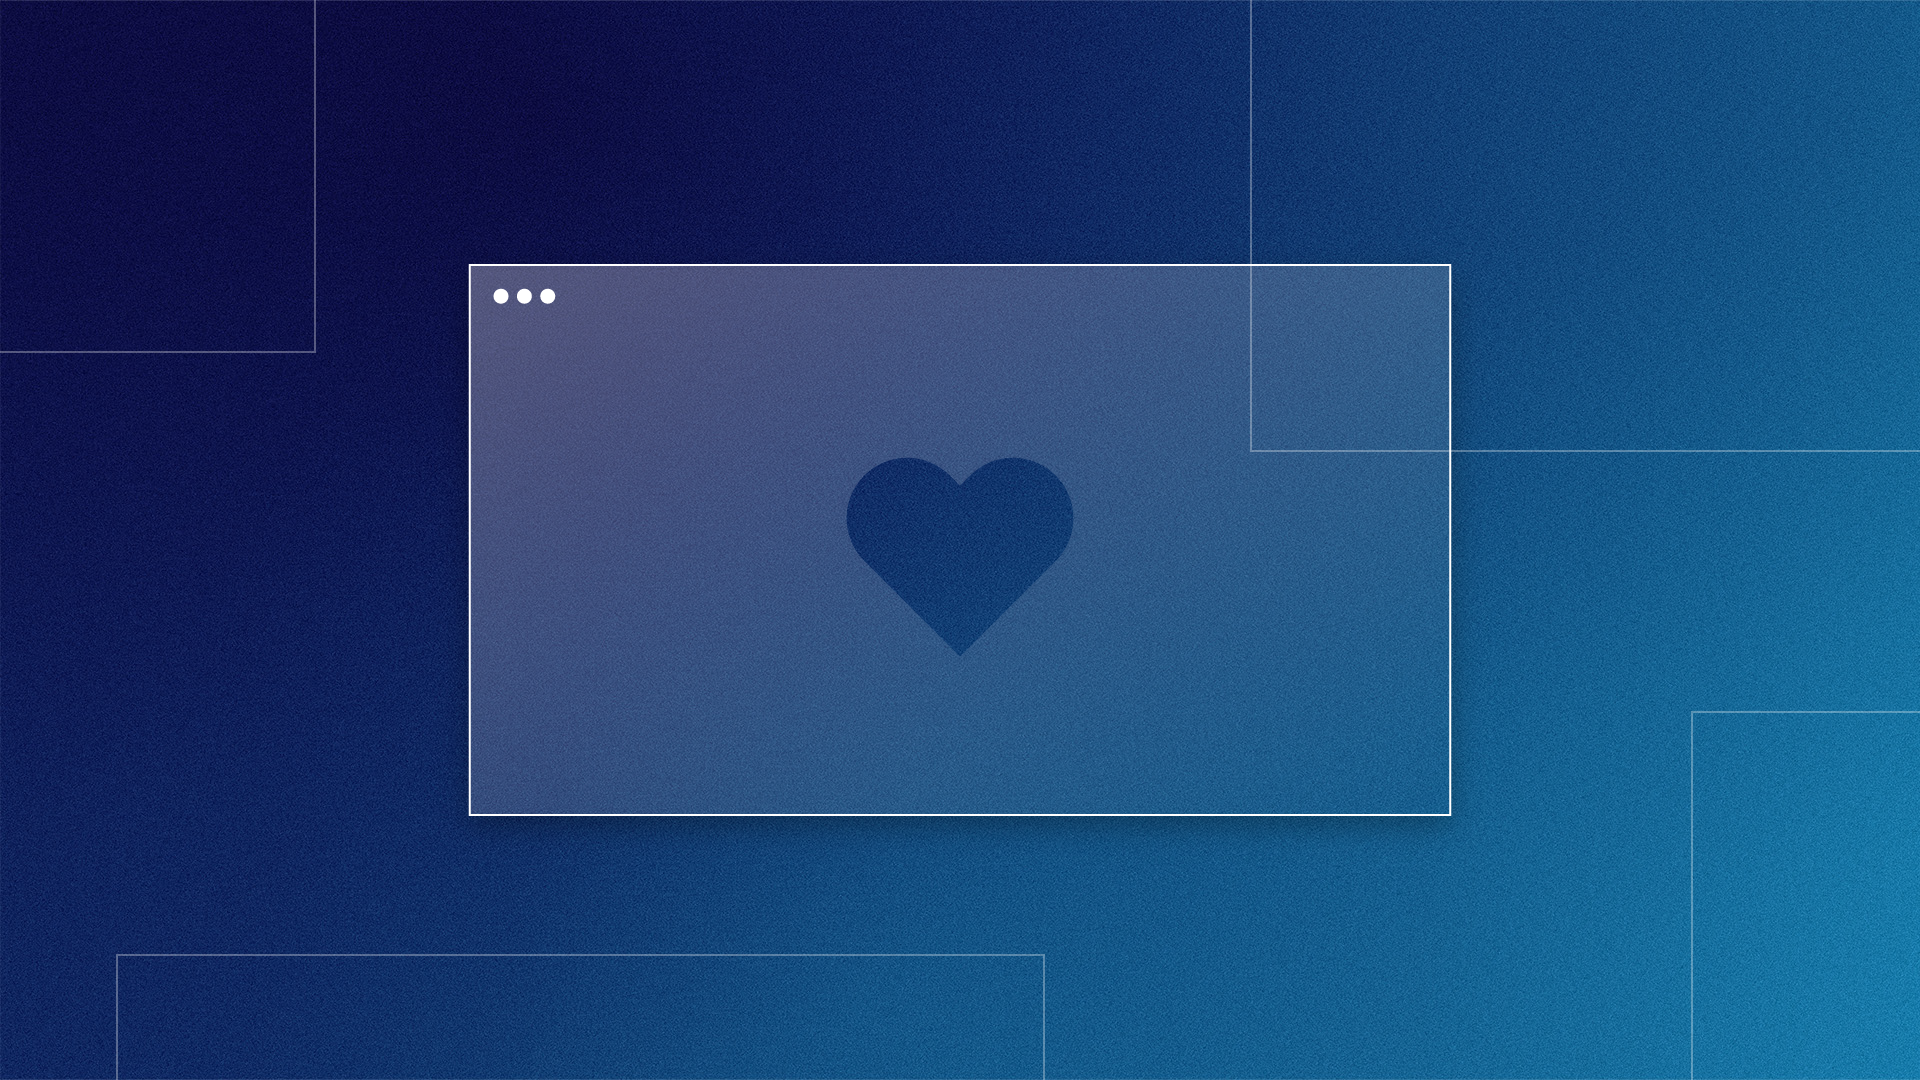 Overlapping rectangles over a blue gradient background